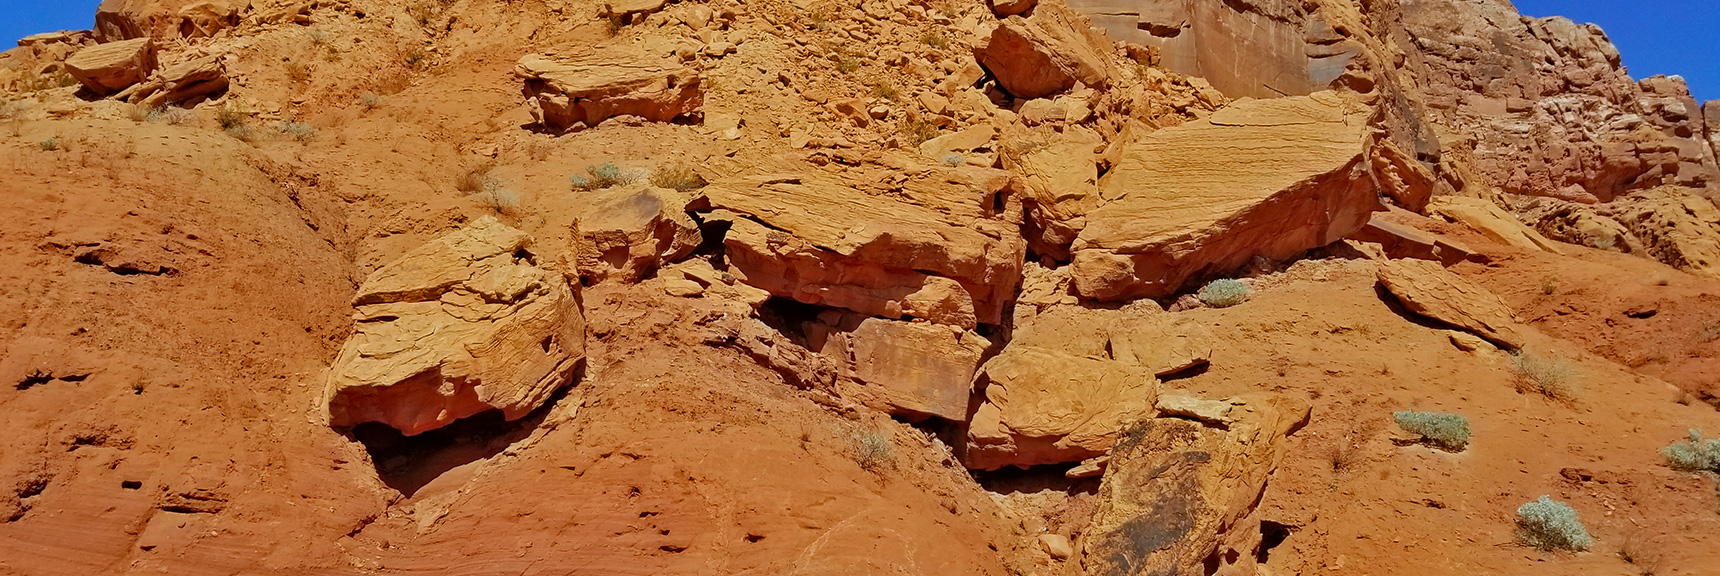 House-Sized Chunks of Red Rock Fallen from the Cliffs Above | Northern Bowl of Fire | Lake Mead National Recreation Area, Nevada